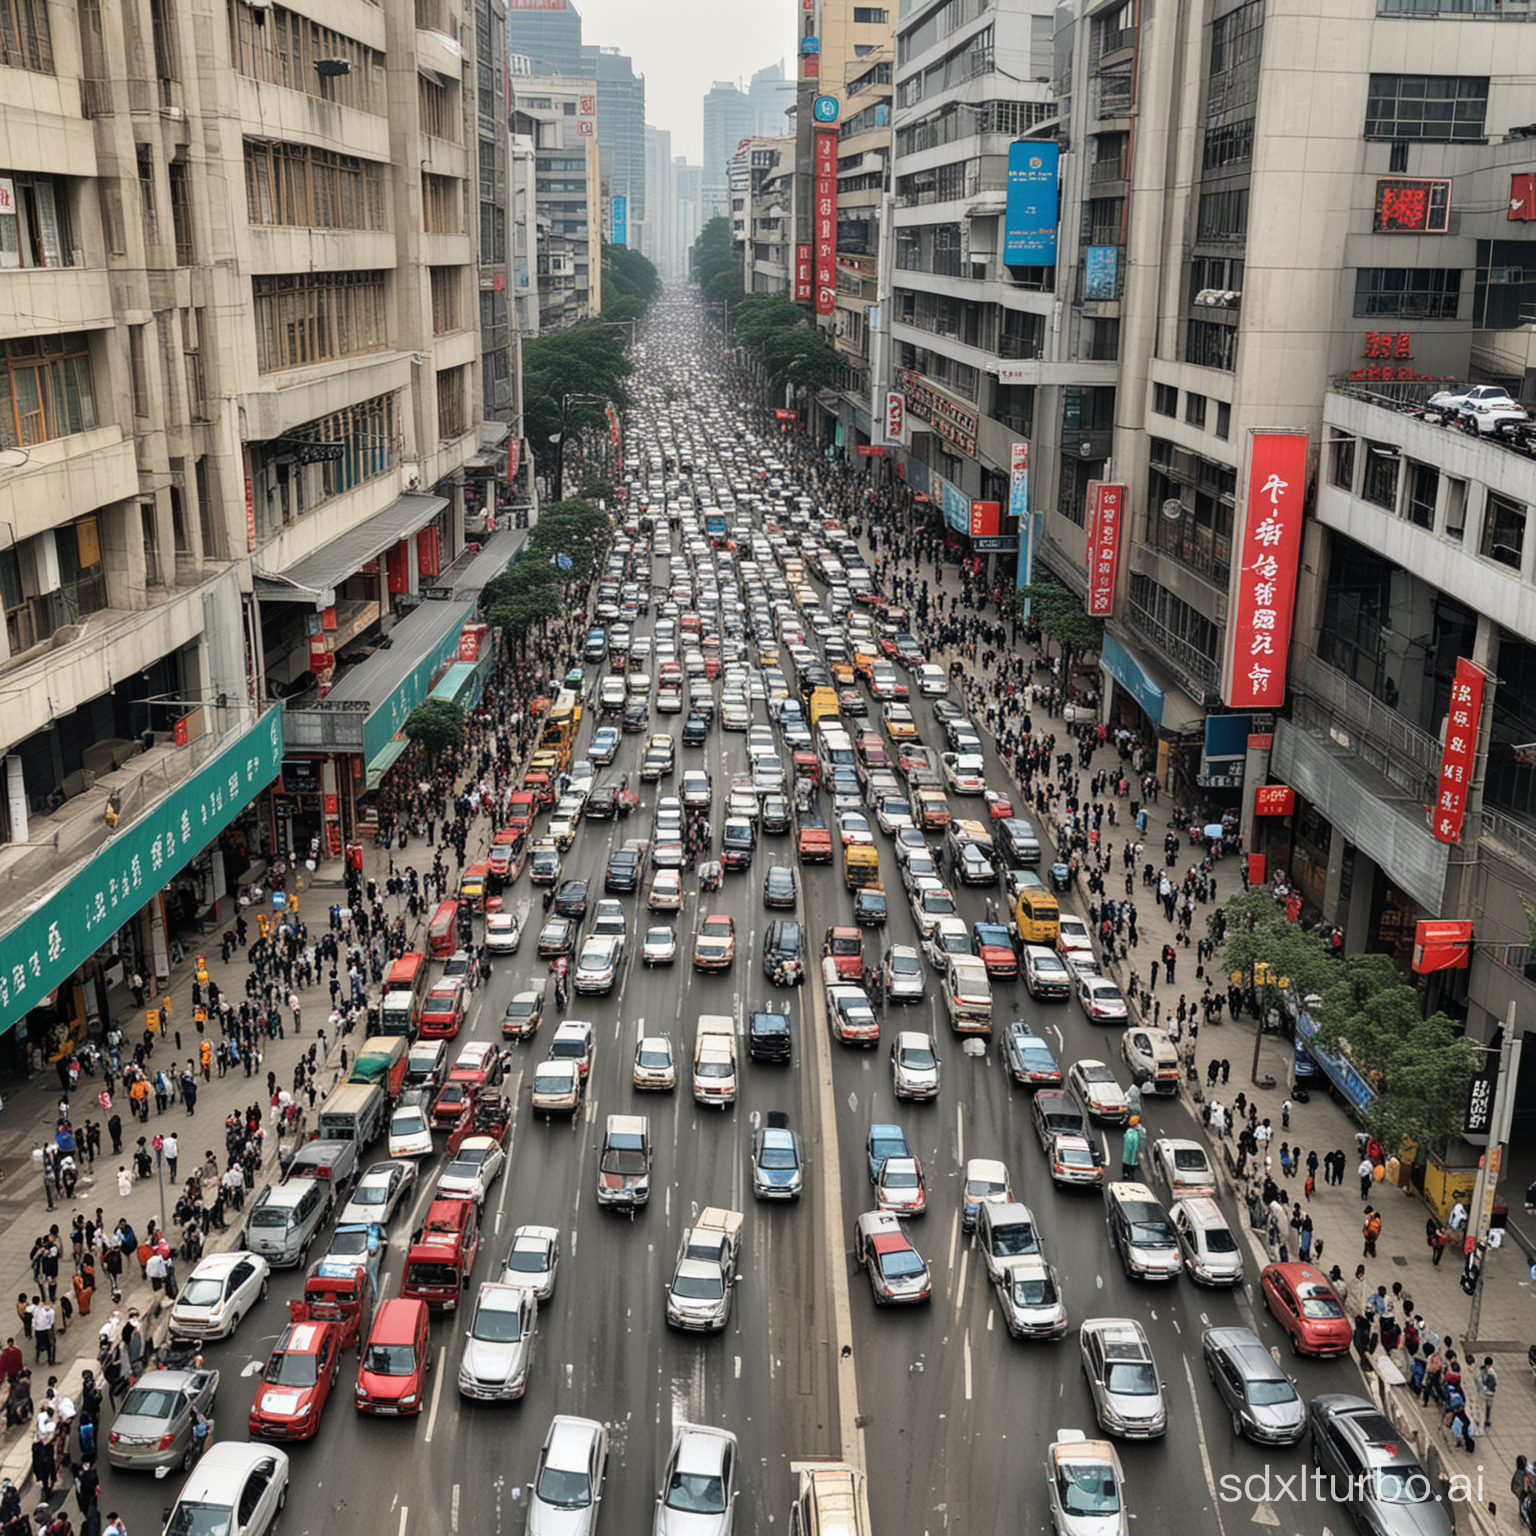 Nanchang Street is bustling with traffic